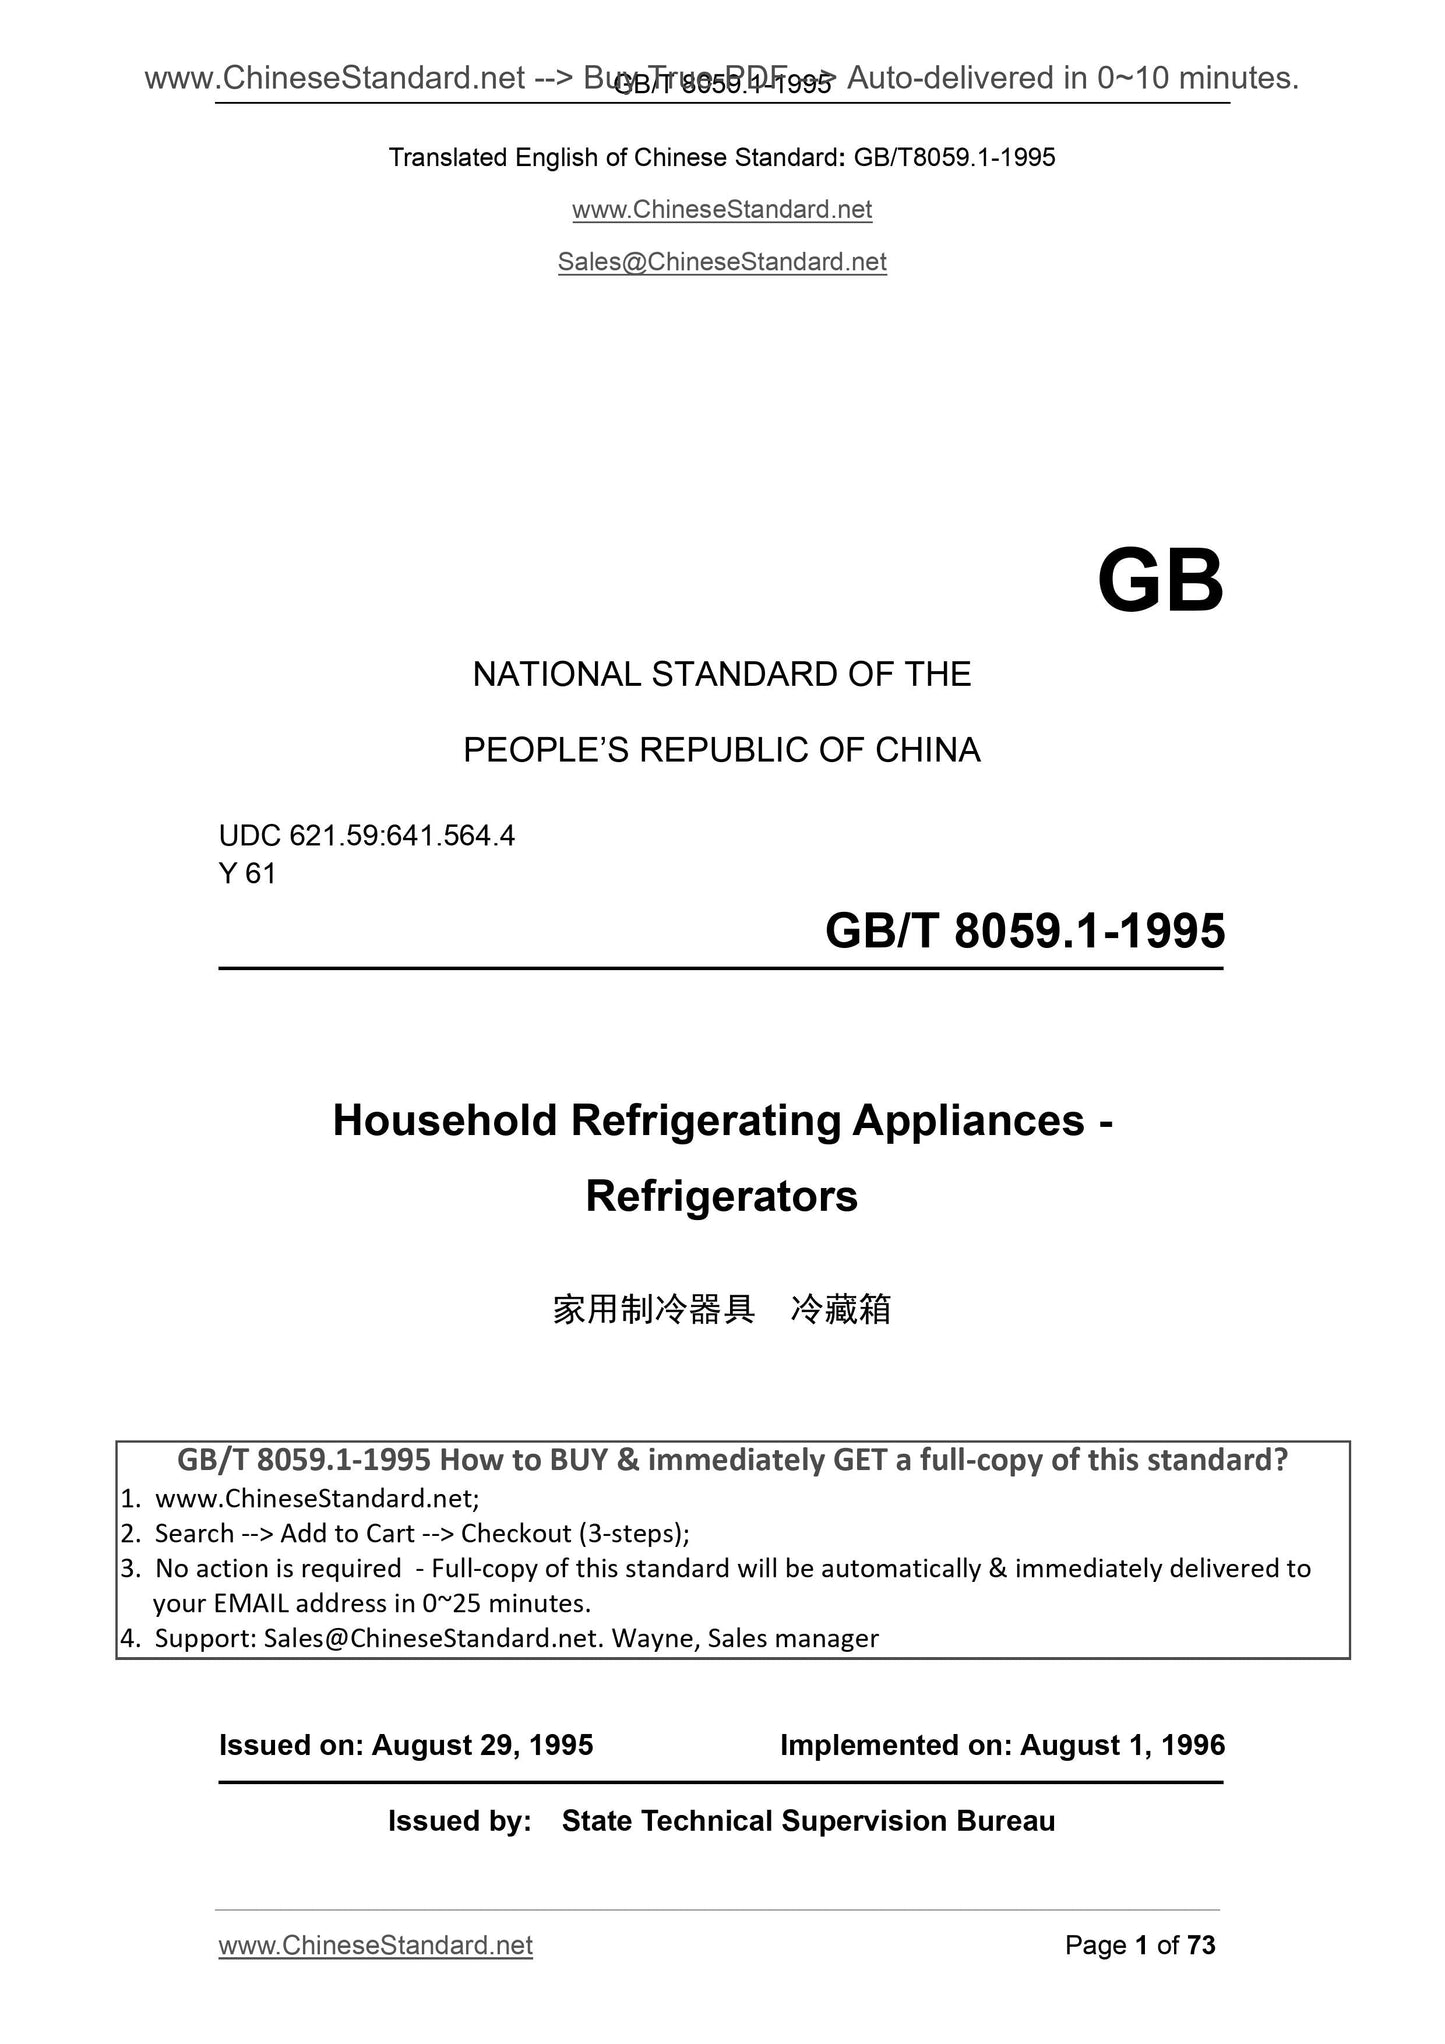 GB/T 8059.1-1995 Page 1